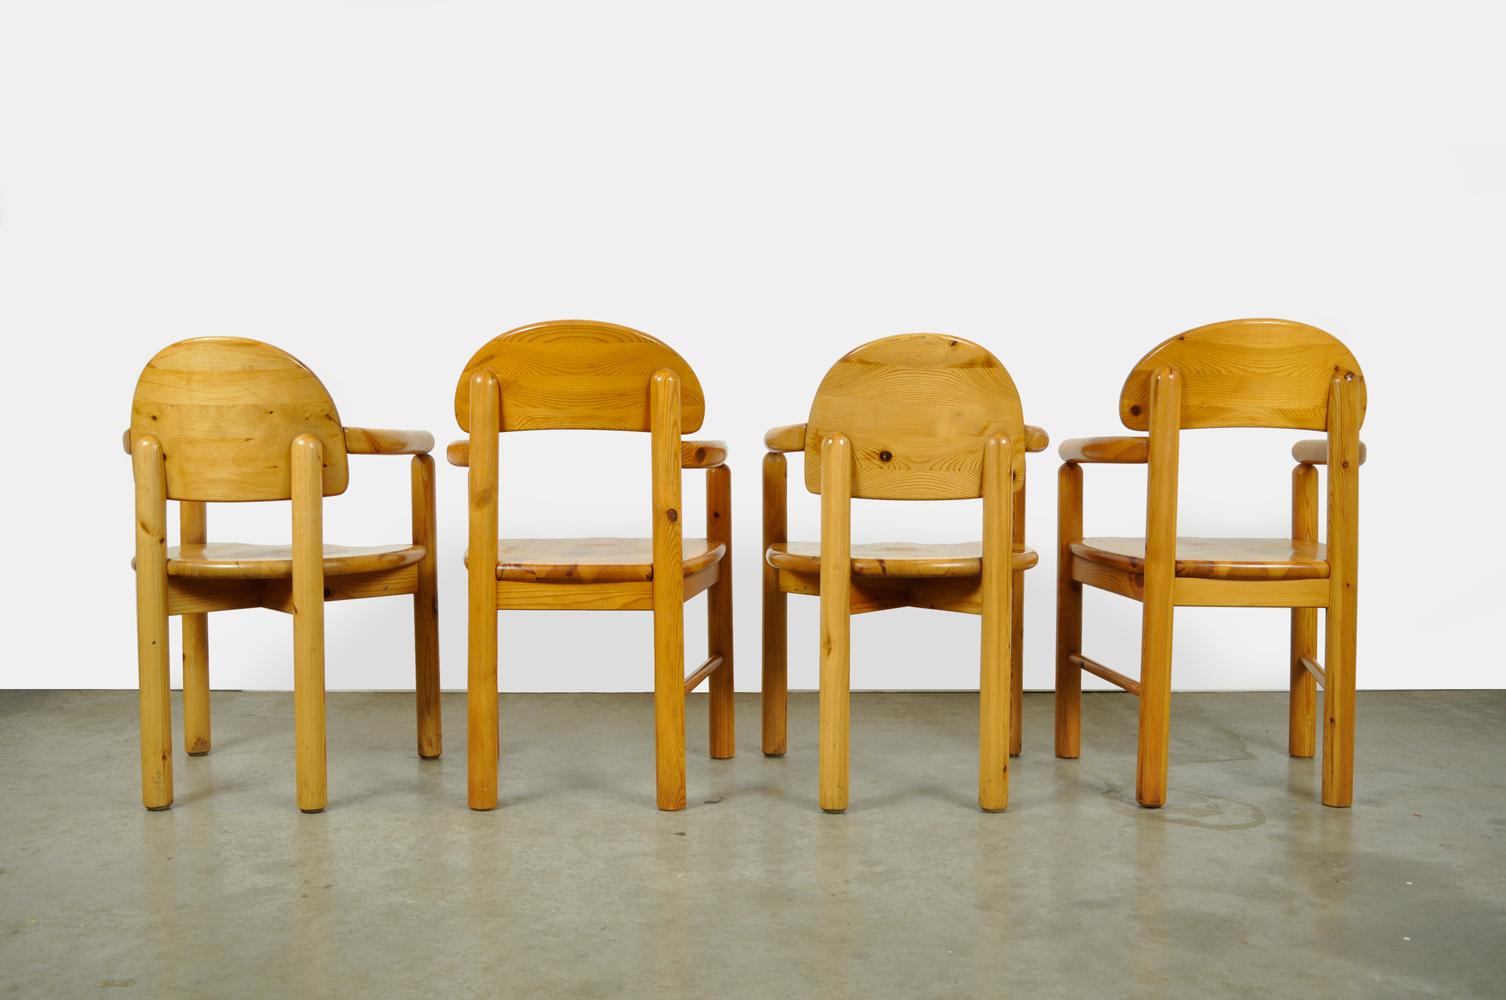 Set of 2×2 vintage pine chairs designed by the Swede Rainer Daumiller and produced by Hirtshals sawmill, Denmark 1970. Sculptural chairs made of solid pine wood with characteristic round design. The set consists of two different types of chairs that